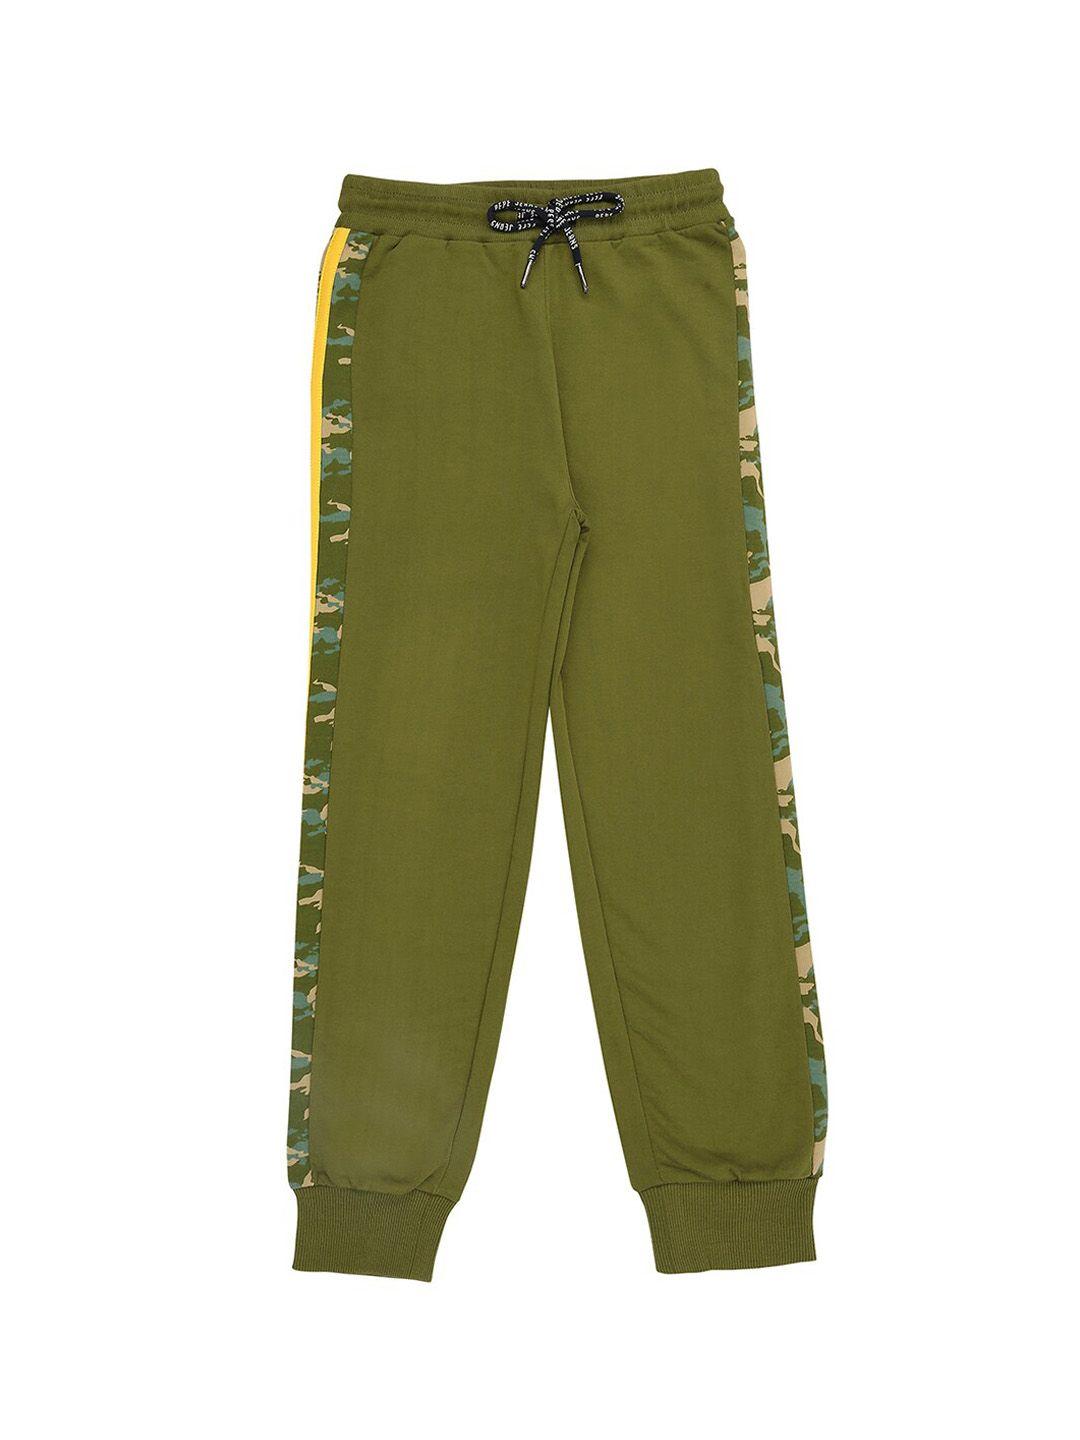 pepe-jeans-boys-green-solid-cotton-track-pants